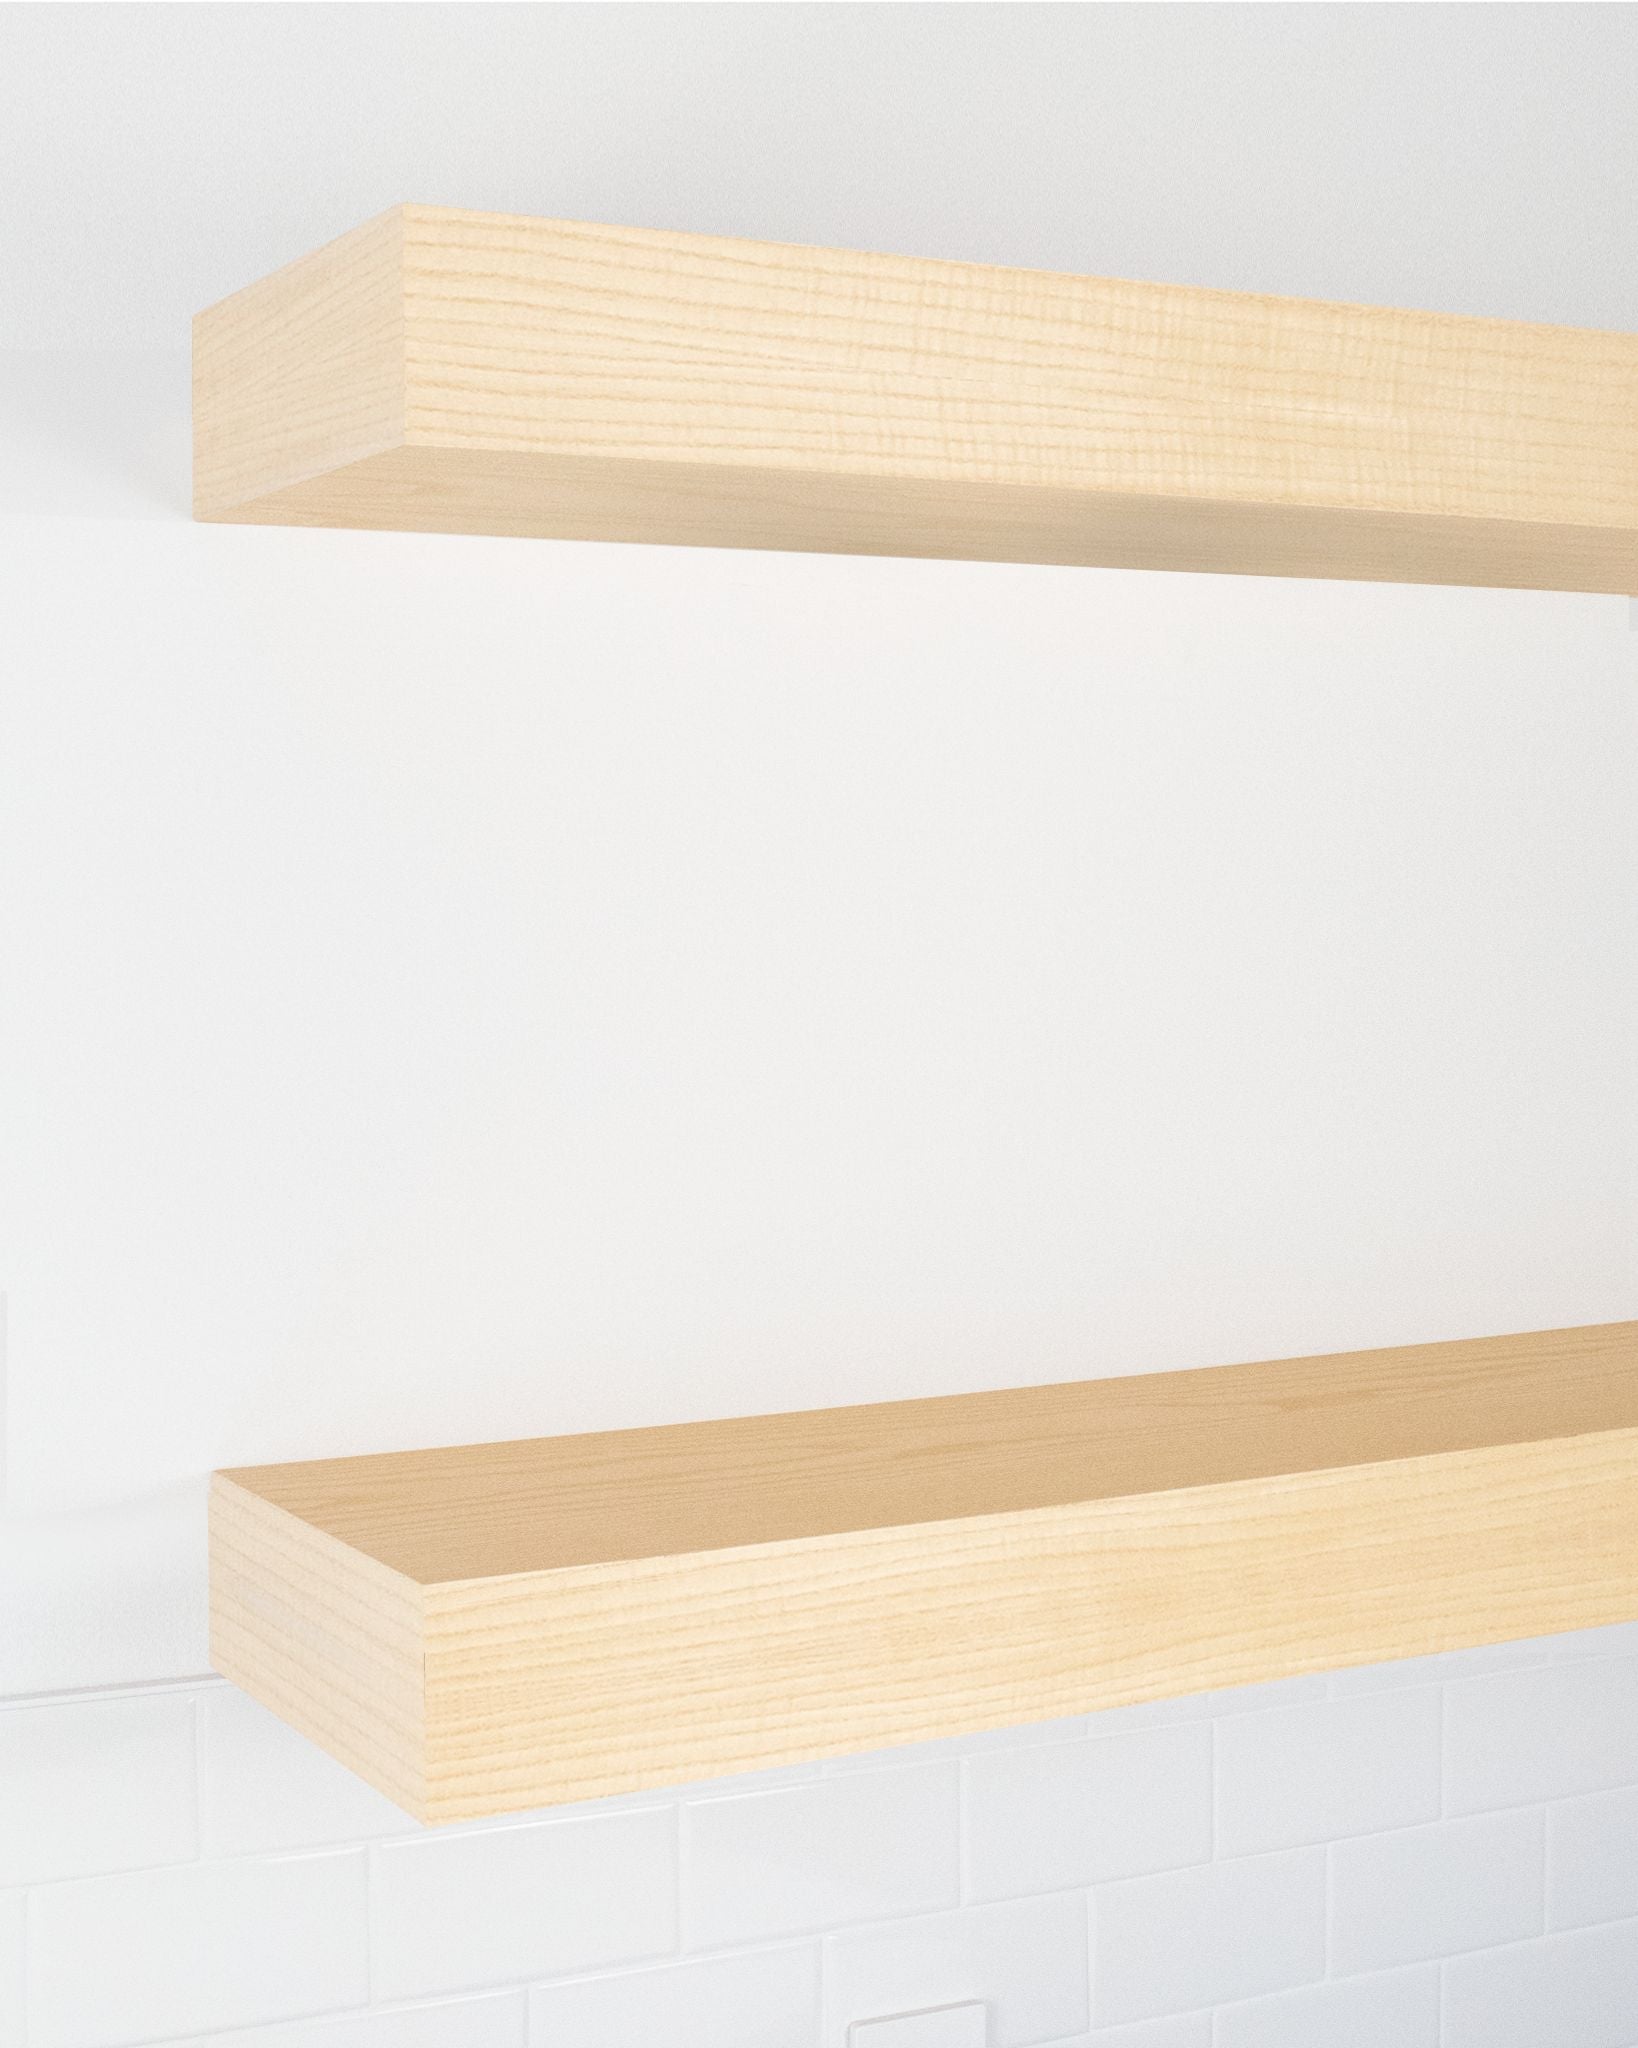 Ash Floating Shelves 2-4" thick